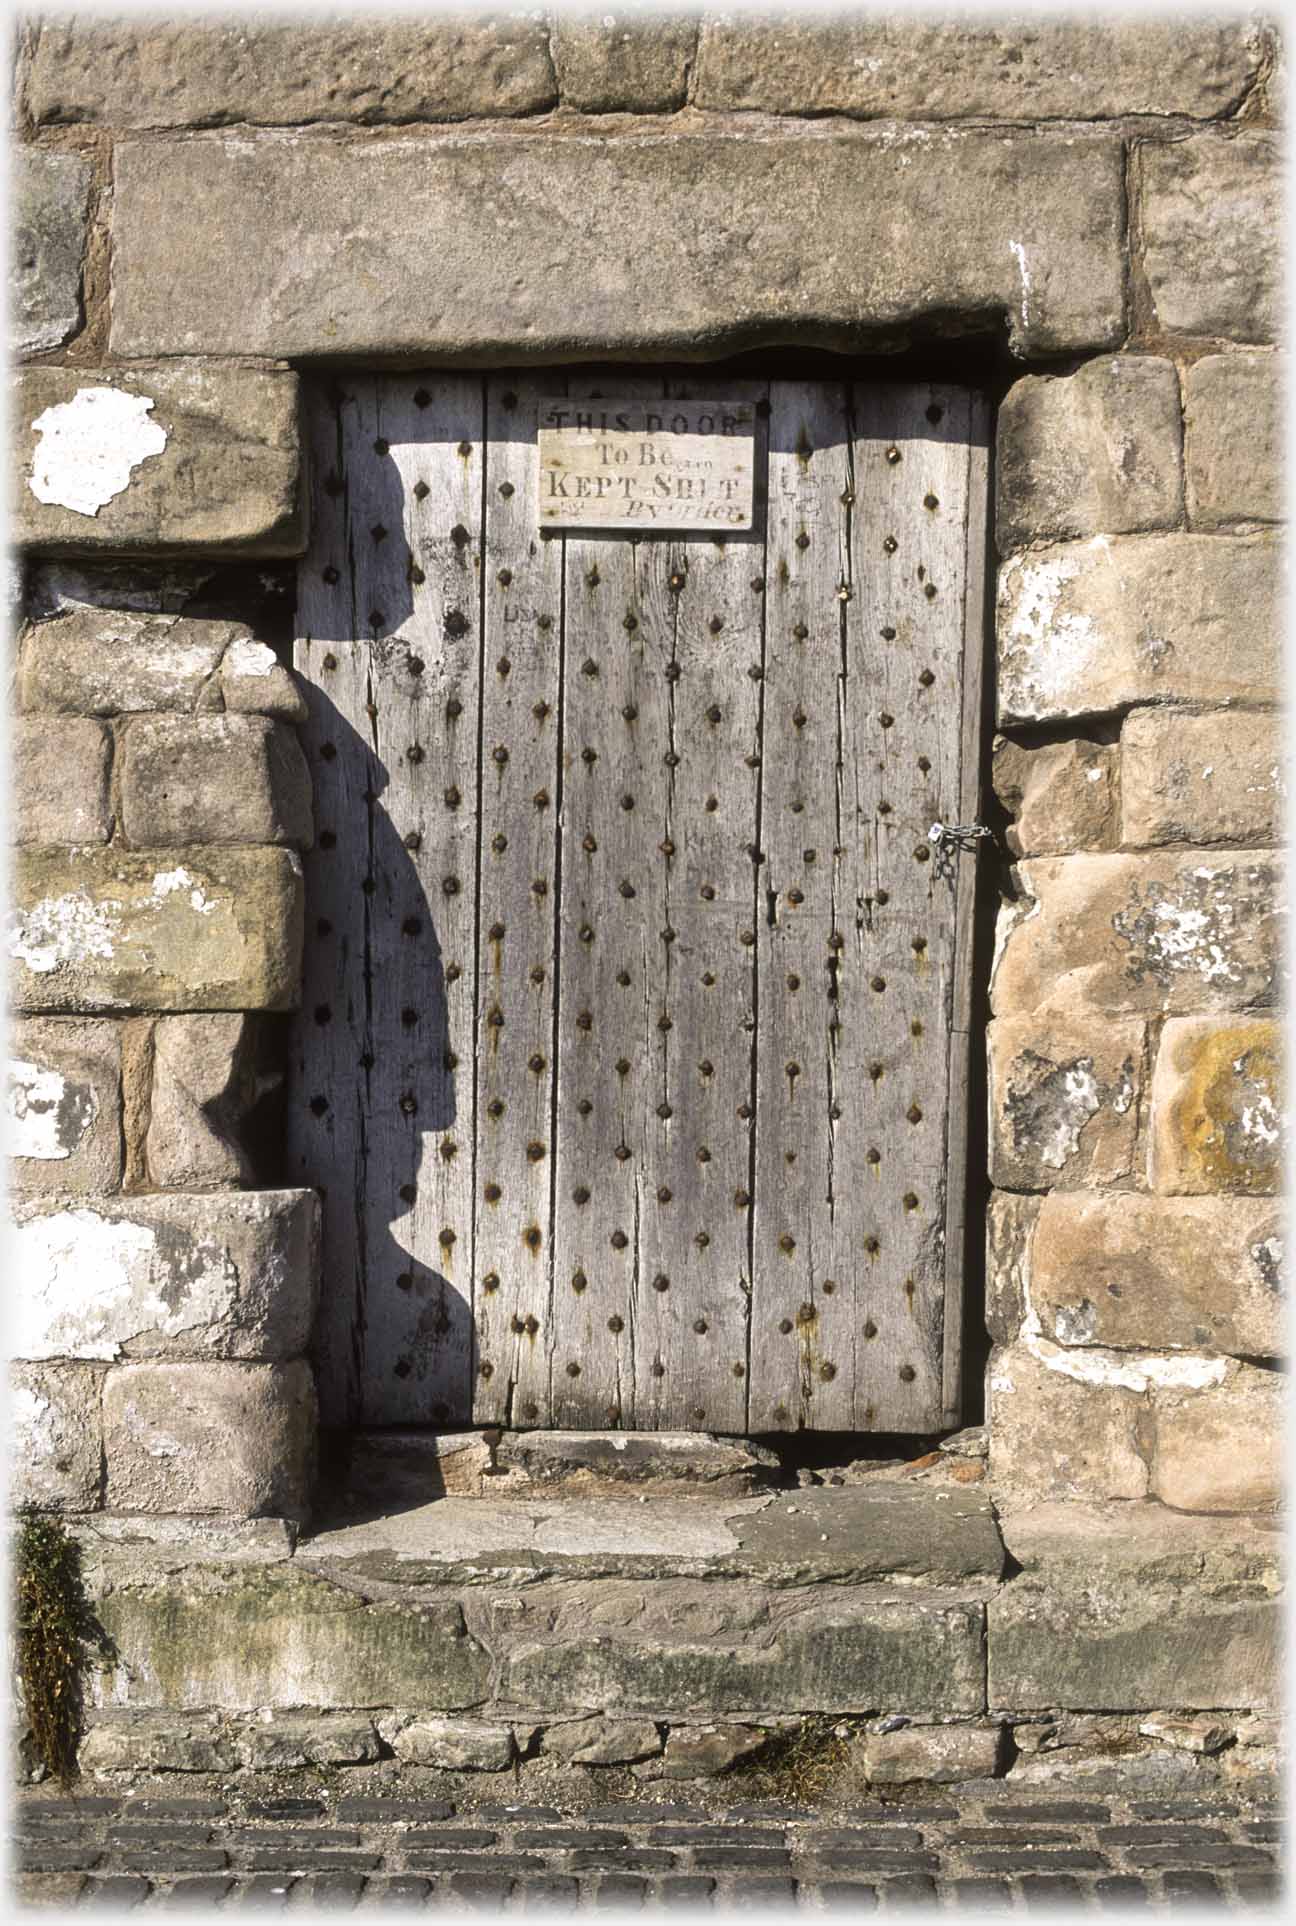 Studded wooden door in wall with sign at top saying This door to be kept shut.